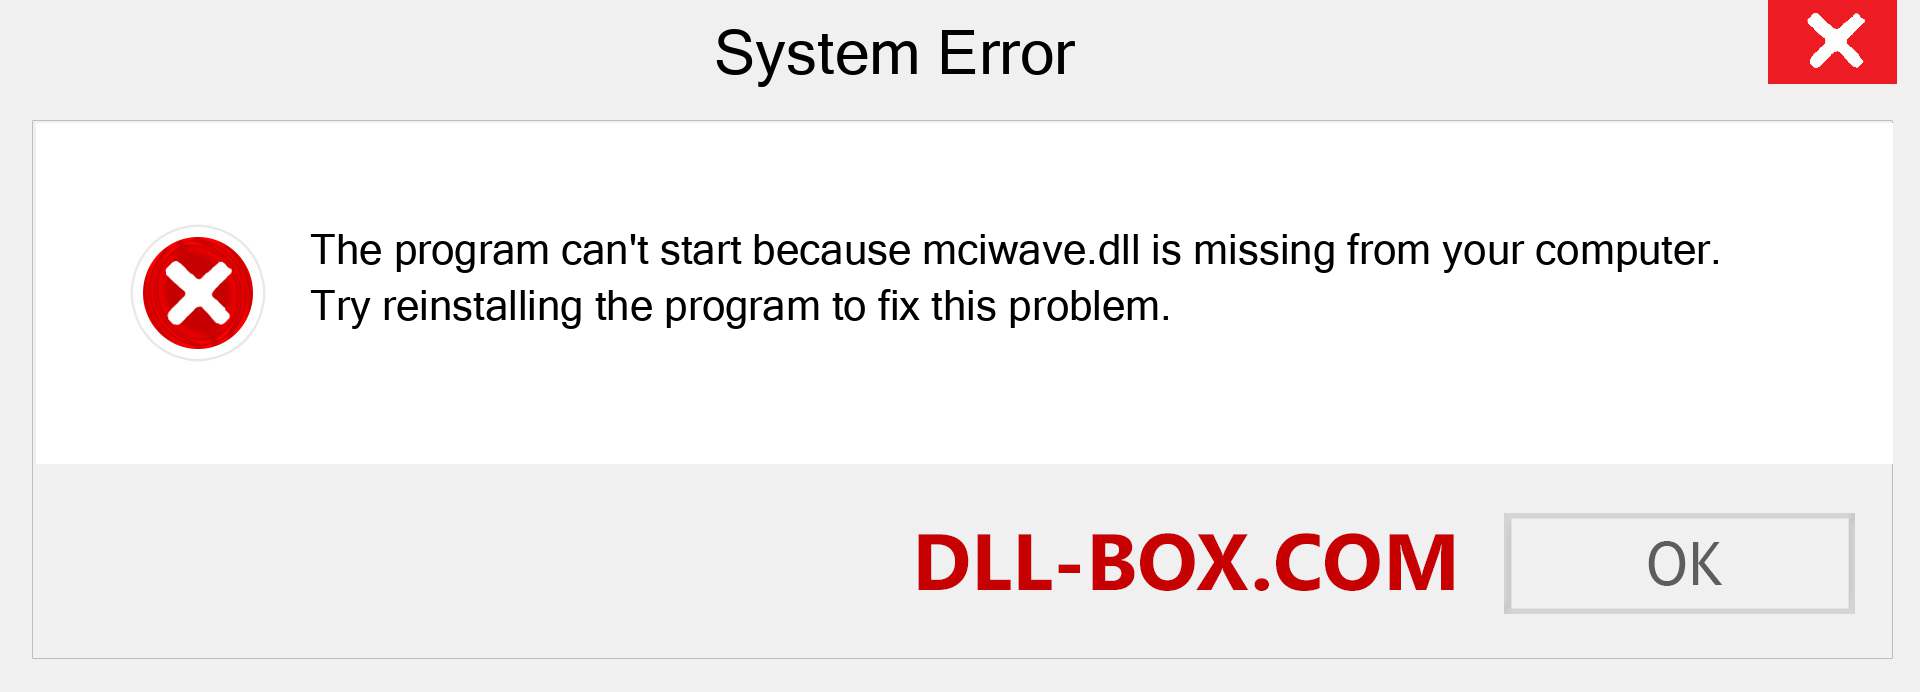  mciwave.dll file is missing?. Download for Windows 7, 8, 10 - Fix  mciwave dll Missing Error on Windows, photos, images